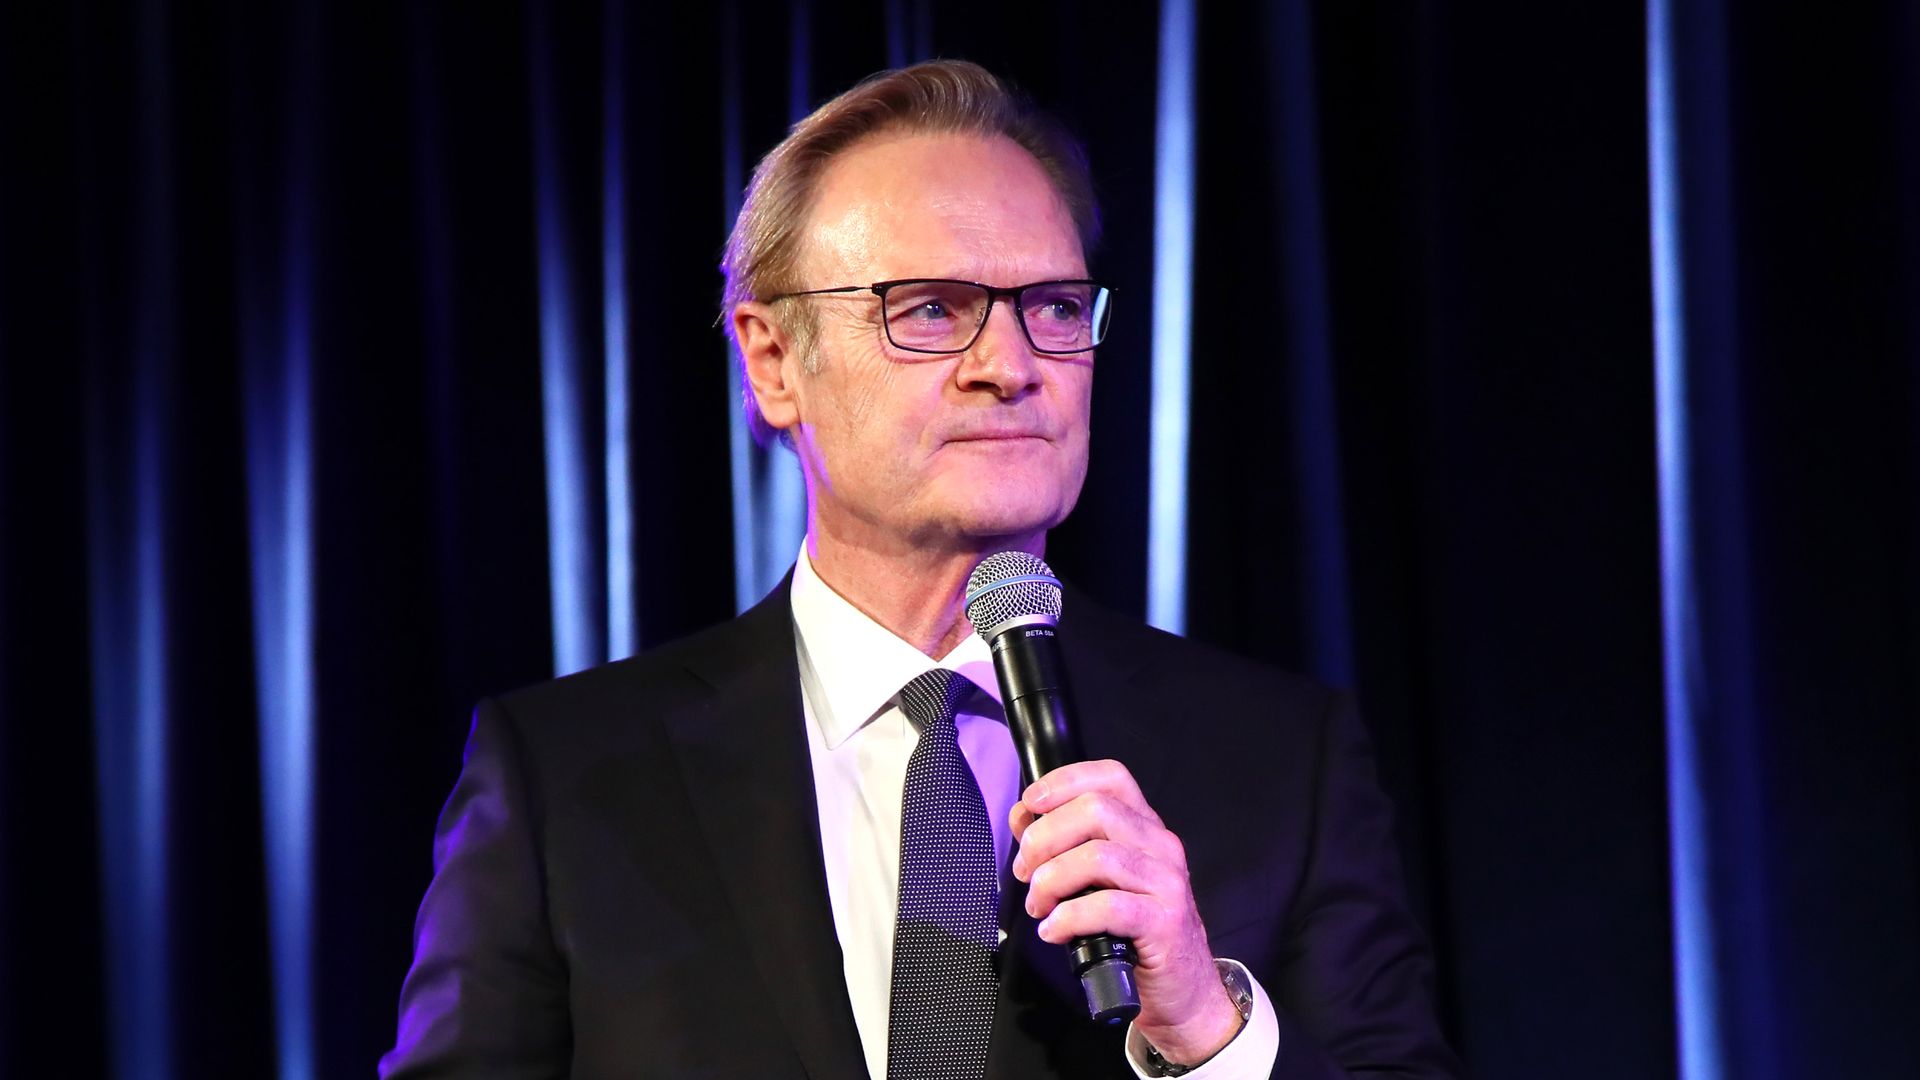 TV Anchor Lawrence O'Donnell speaks at The Hospital for Special Surgery 35th Tribute Dinner at the American Museum of Natural History on June 4